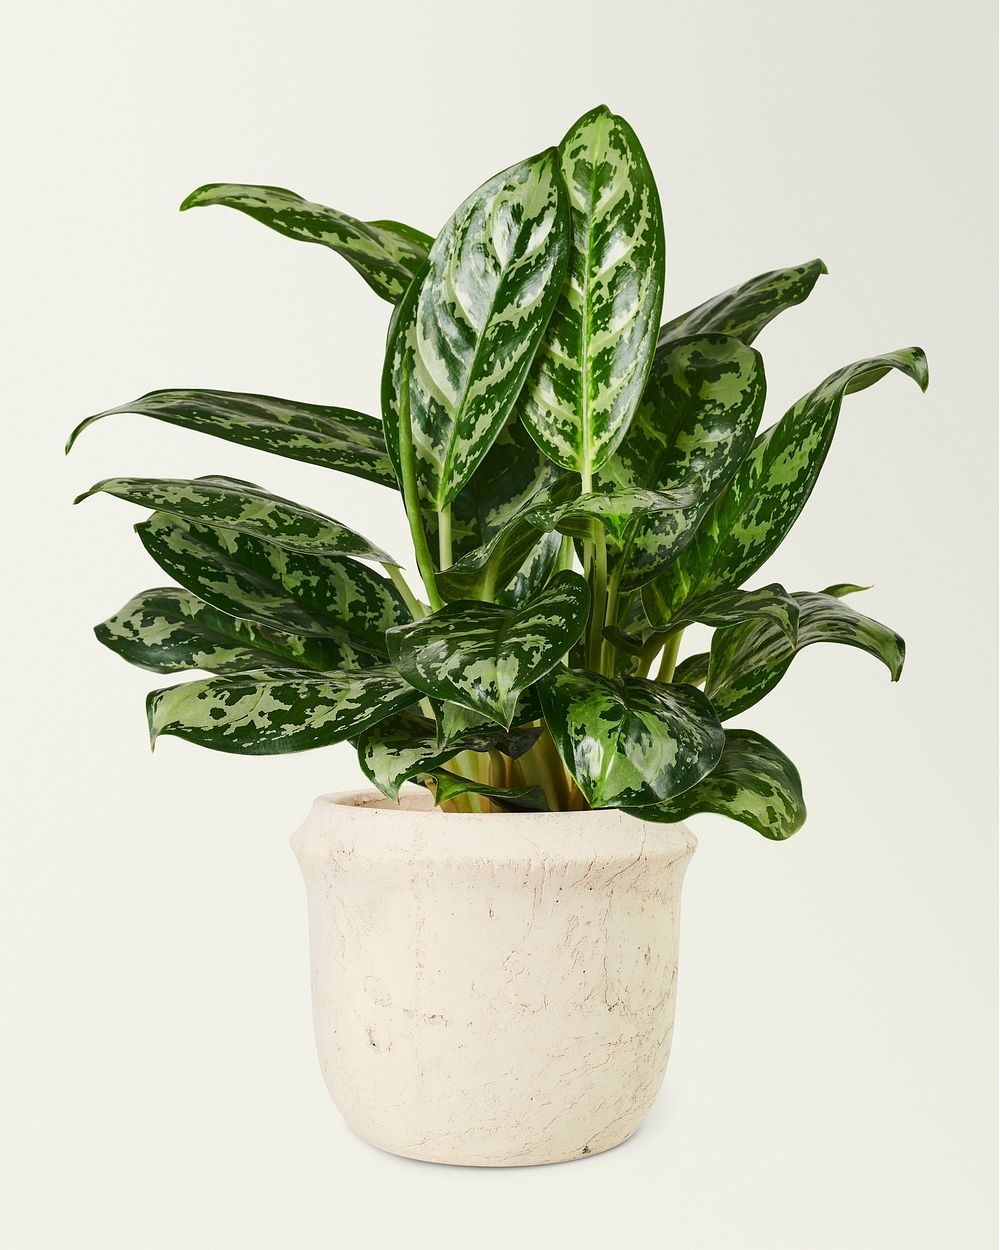 Chinese evergreen plant in a ceramic pot